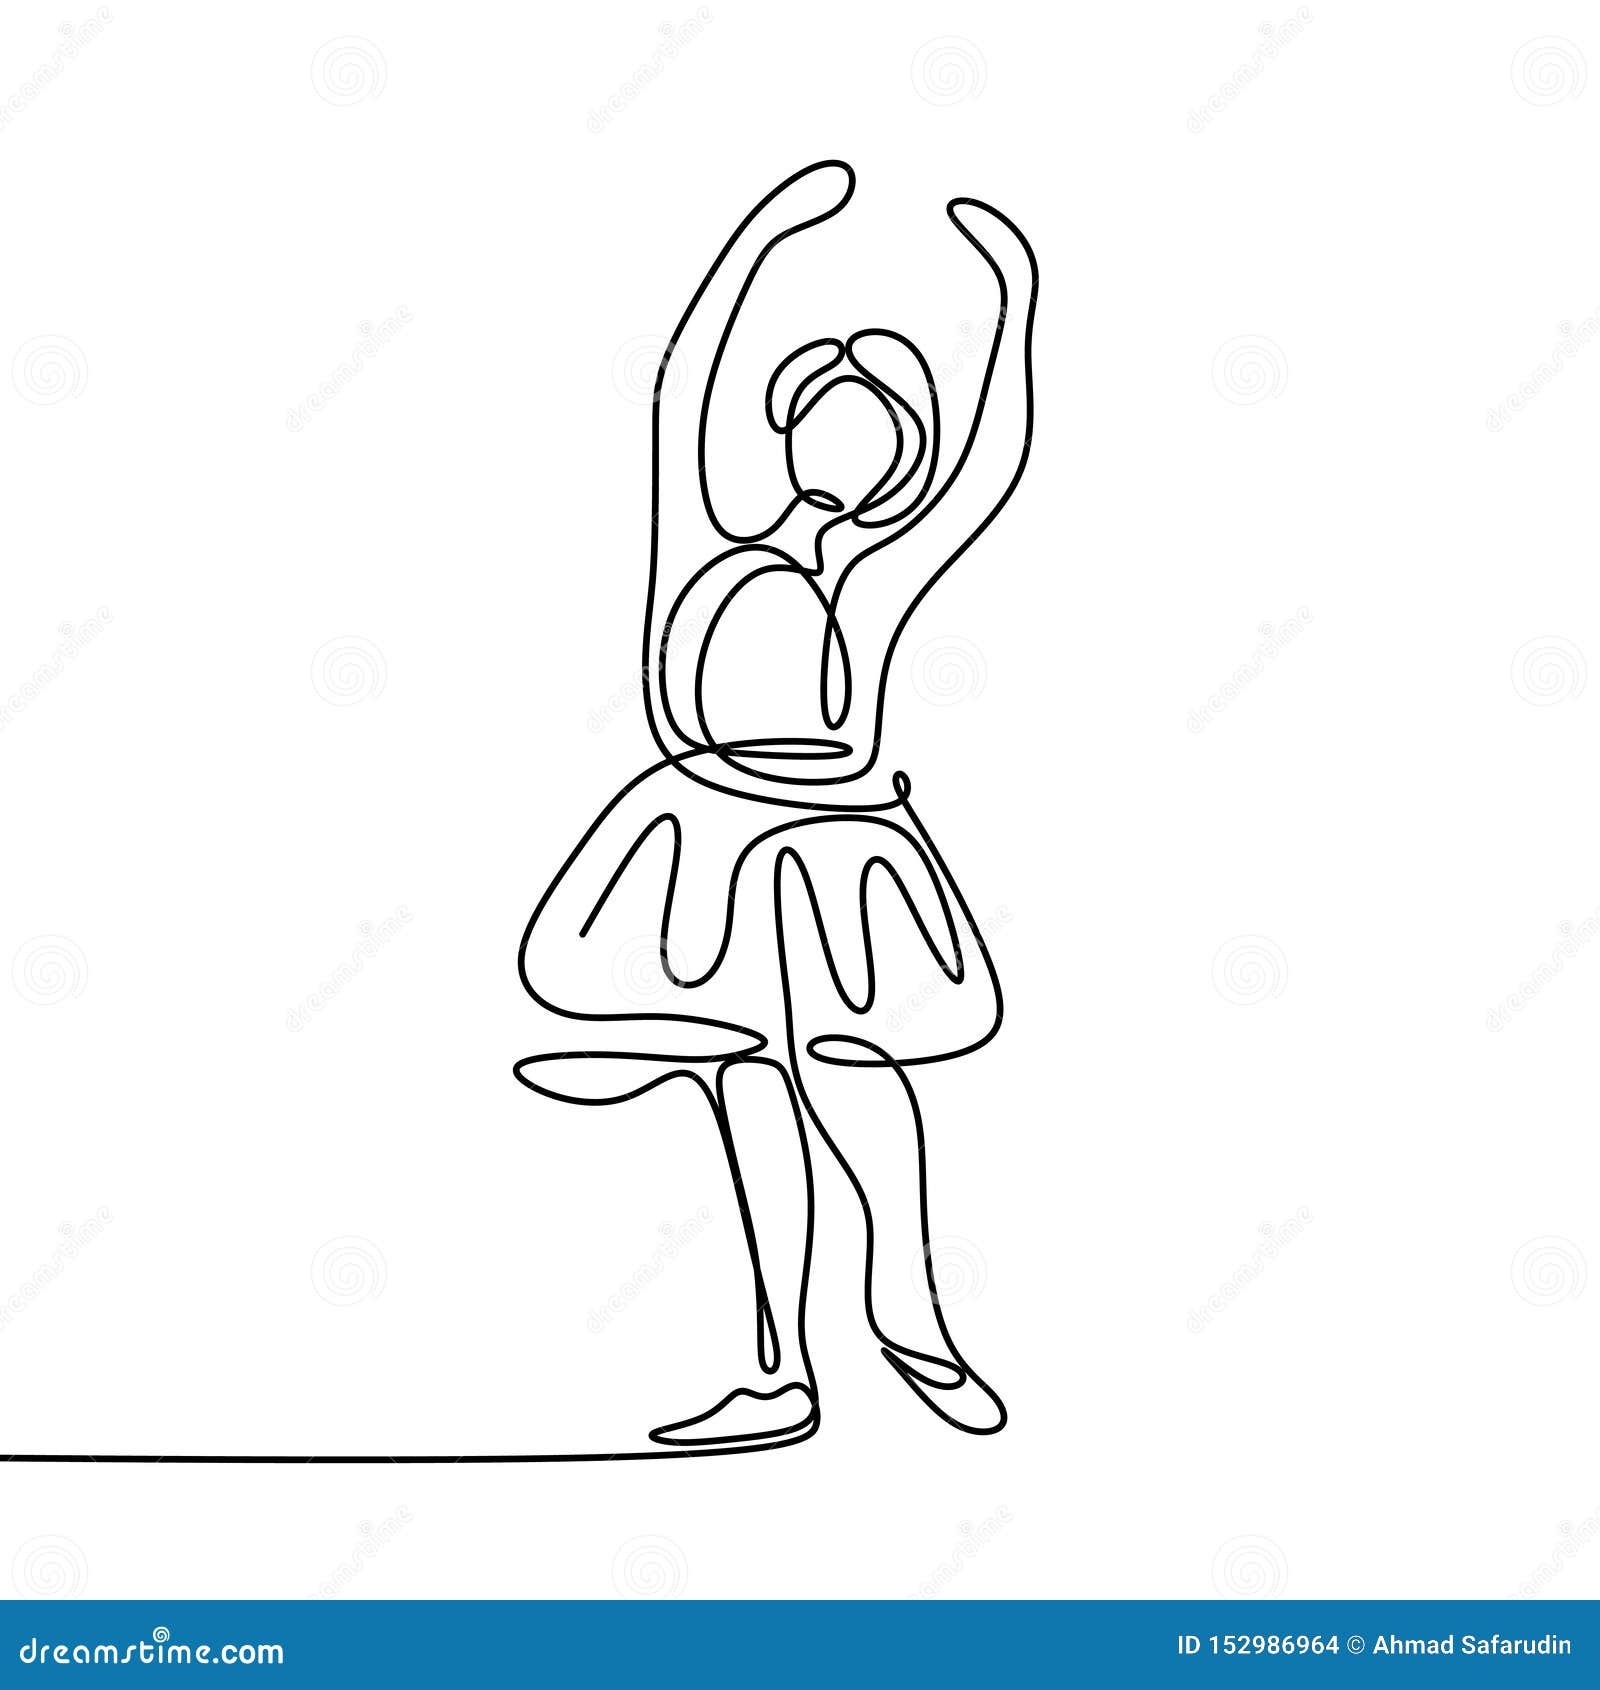 One Line Art, Drawing of a Young Girl Dancing, Wearing Dress, Vector ...